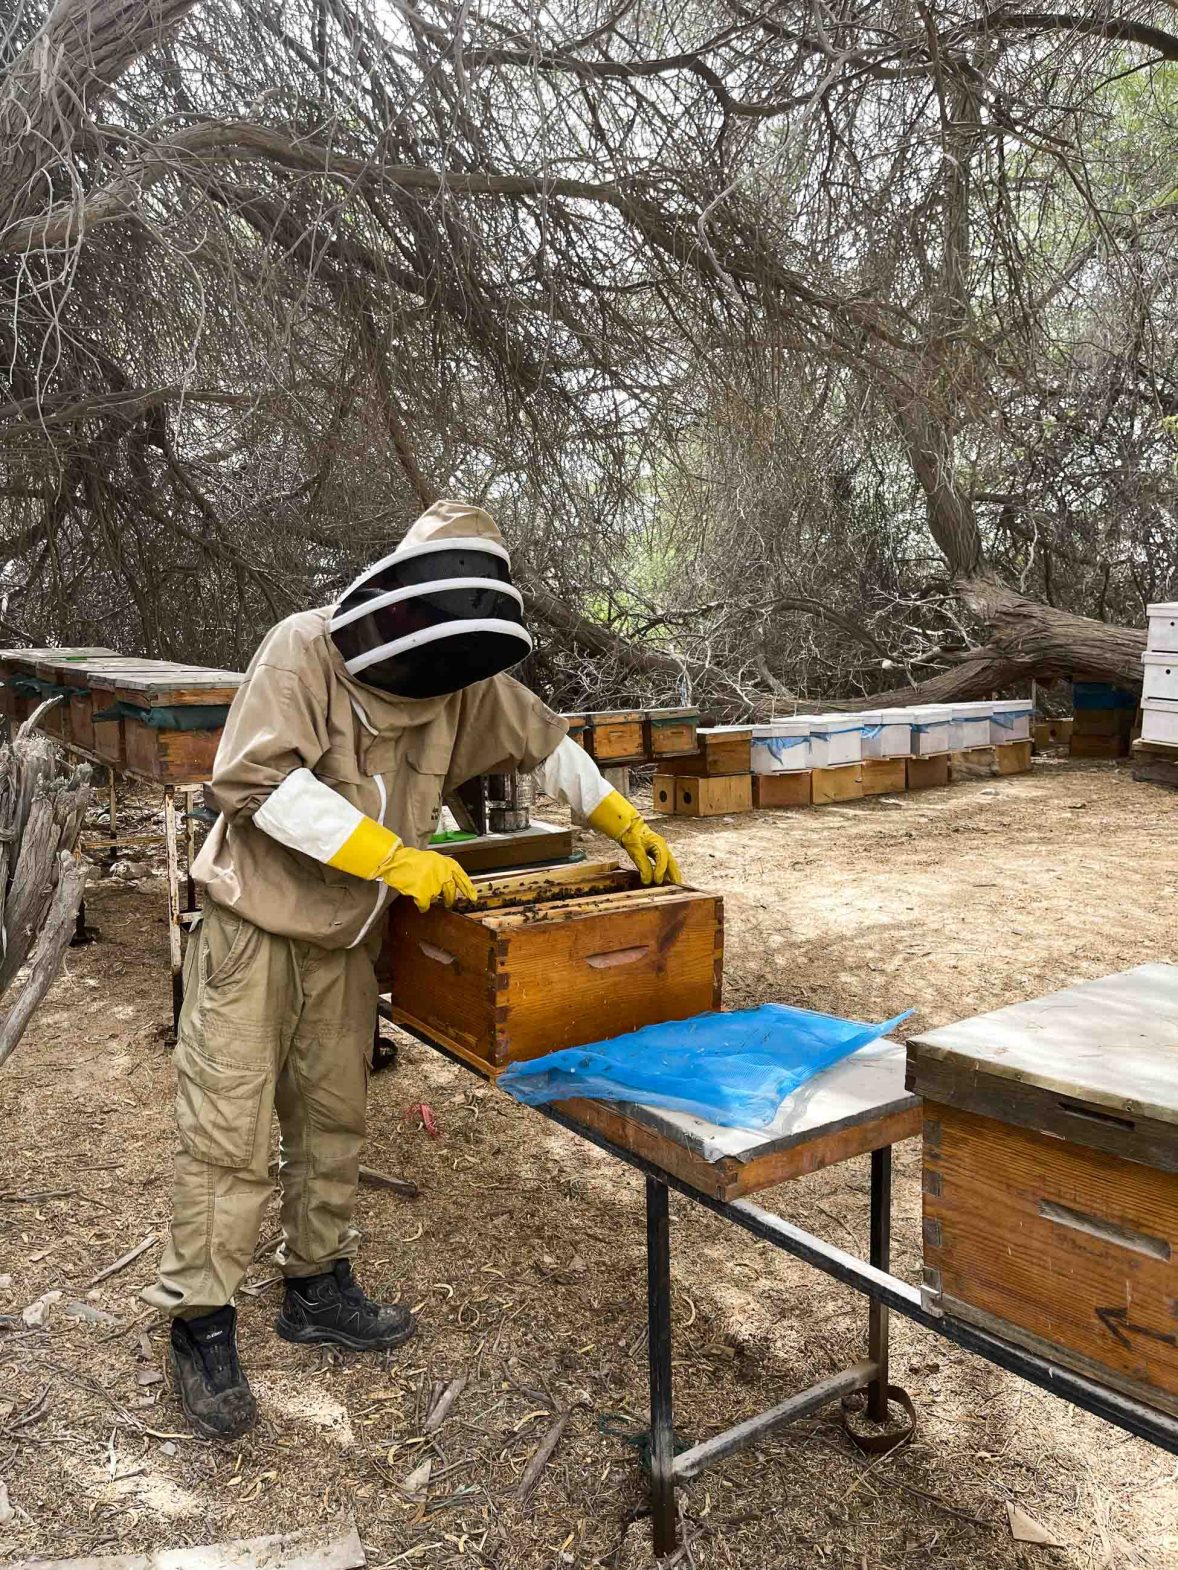 A worker in protective gear works with the bees.